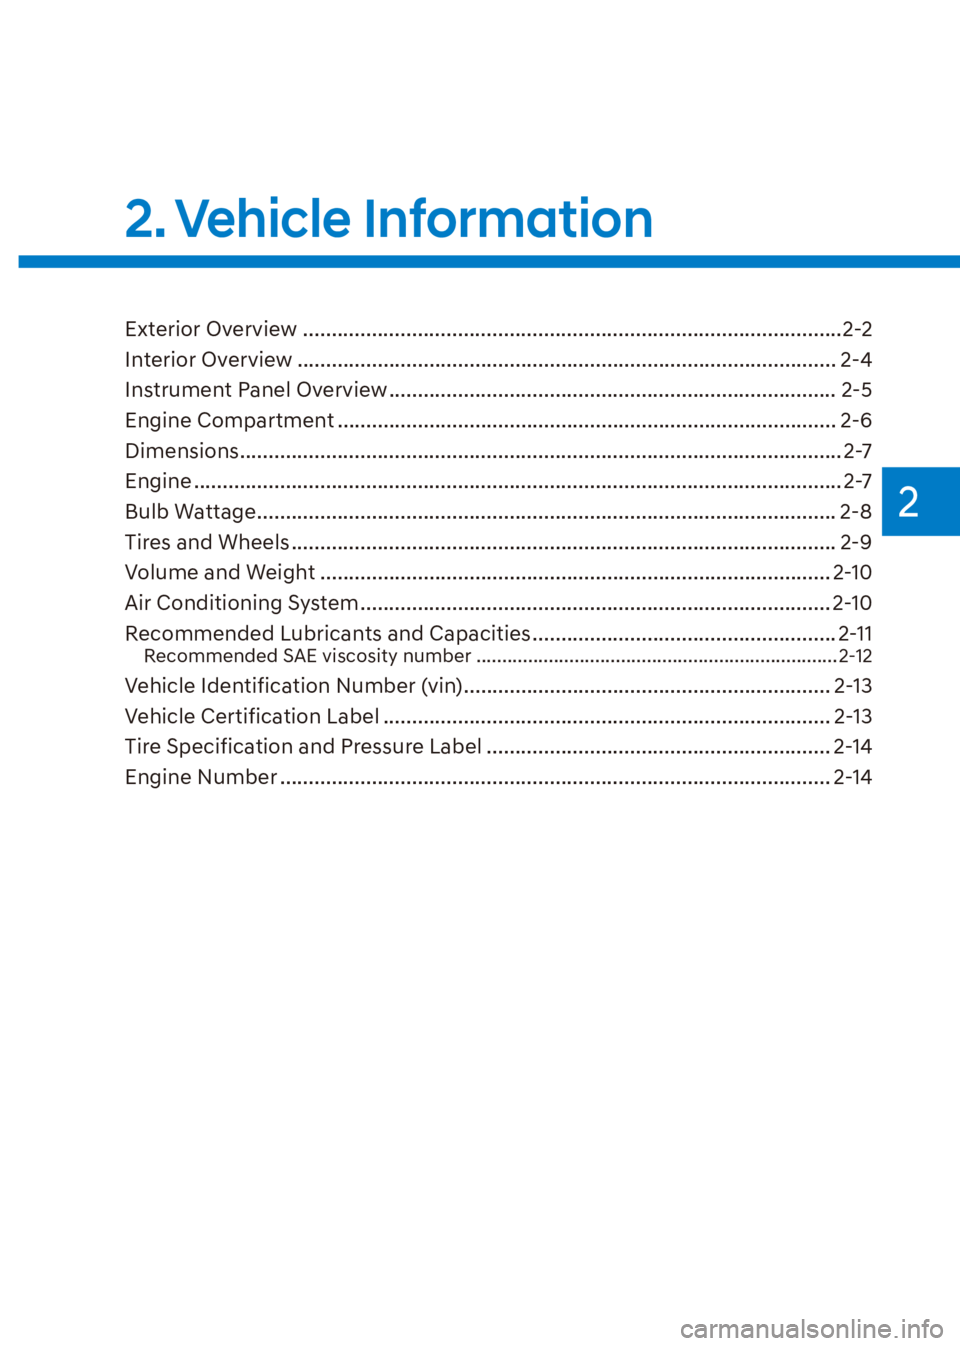 HYUNDAI VENUE 2022 User Guide 2
2. Vehicle  Information
Exterior Overview ..............................................................................................2-2
Interior Overview ........................................